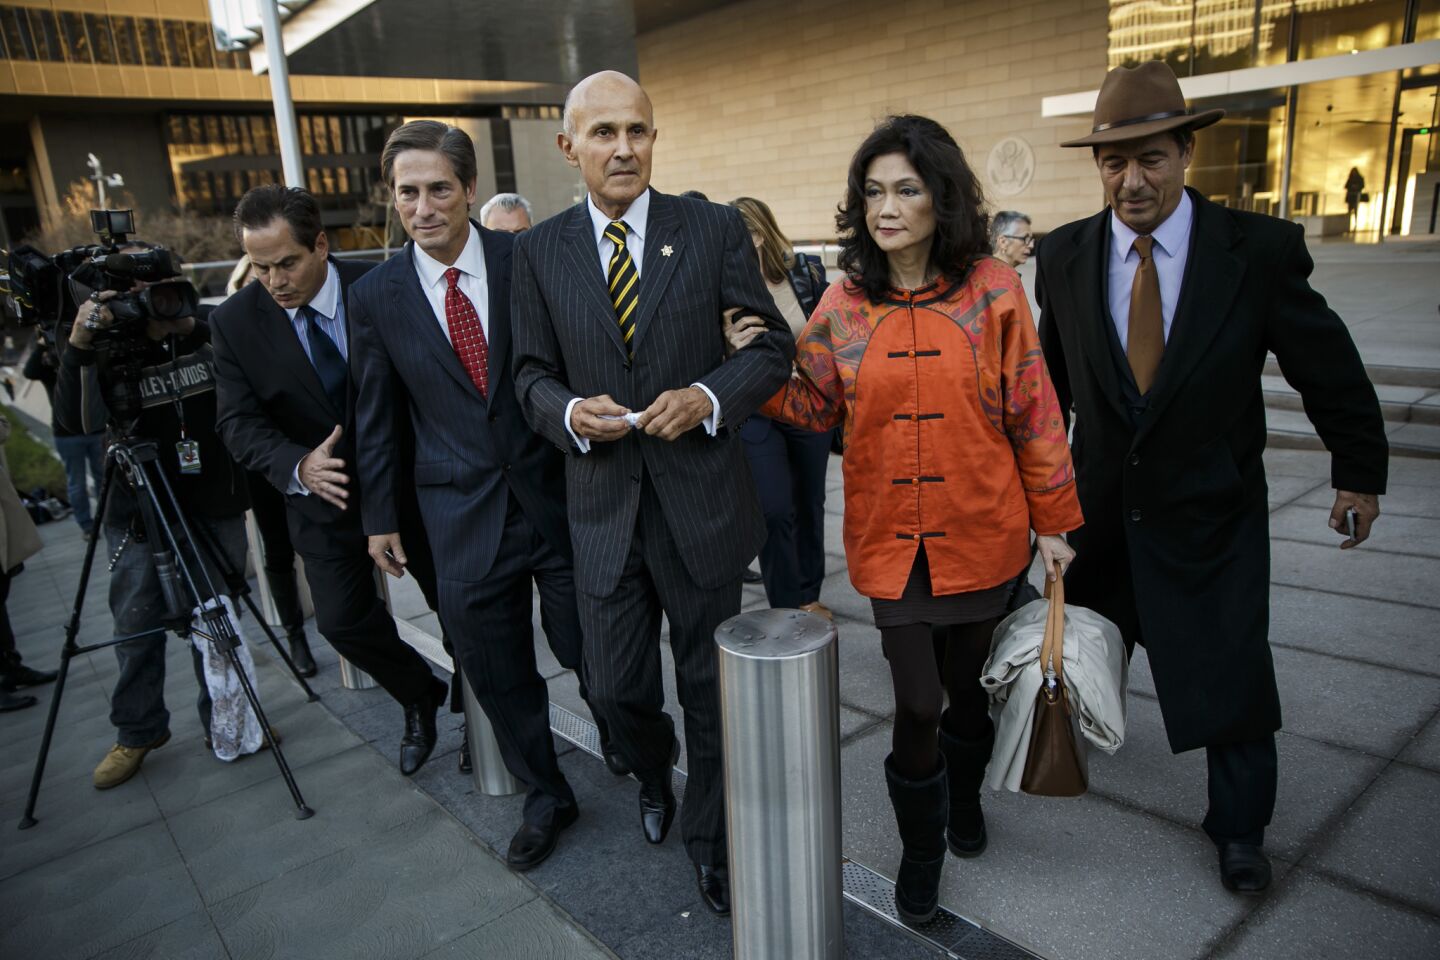 Former Los Angeles County Sheriff Lee Baca, center, escorted by his wife, Carol Chiang, right, and h